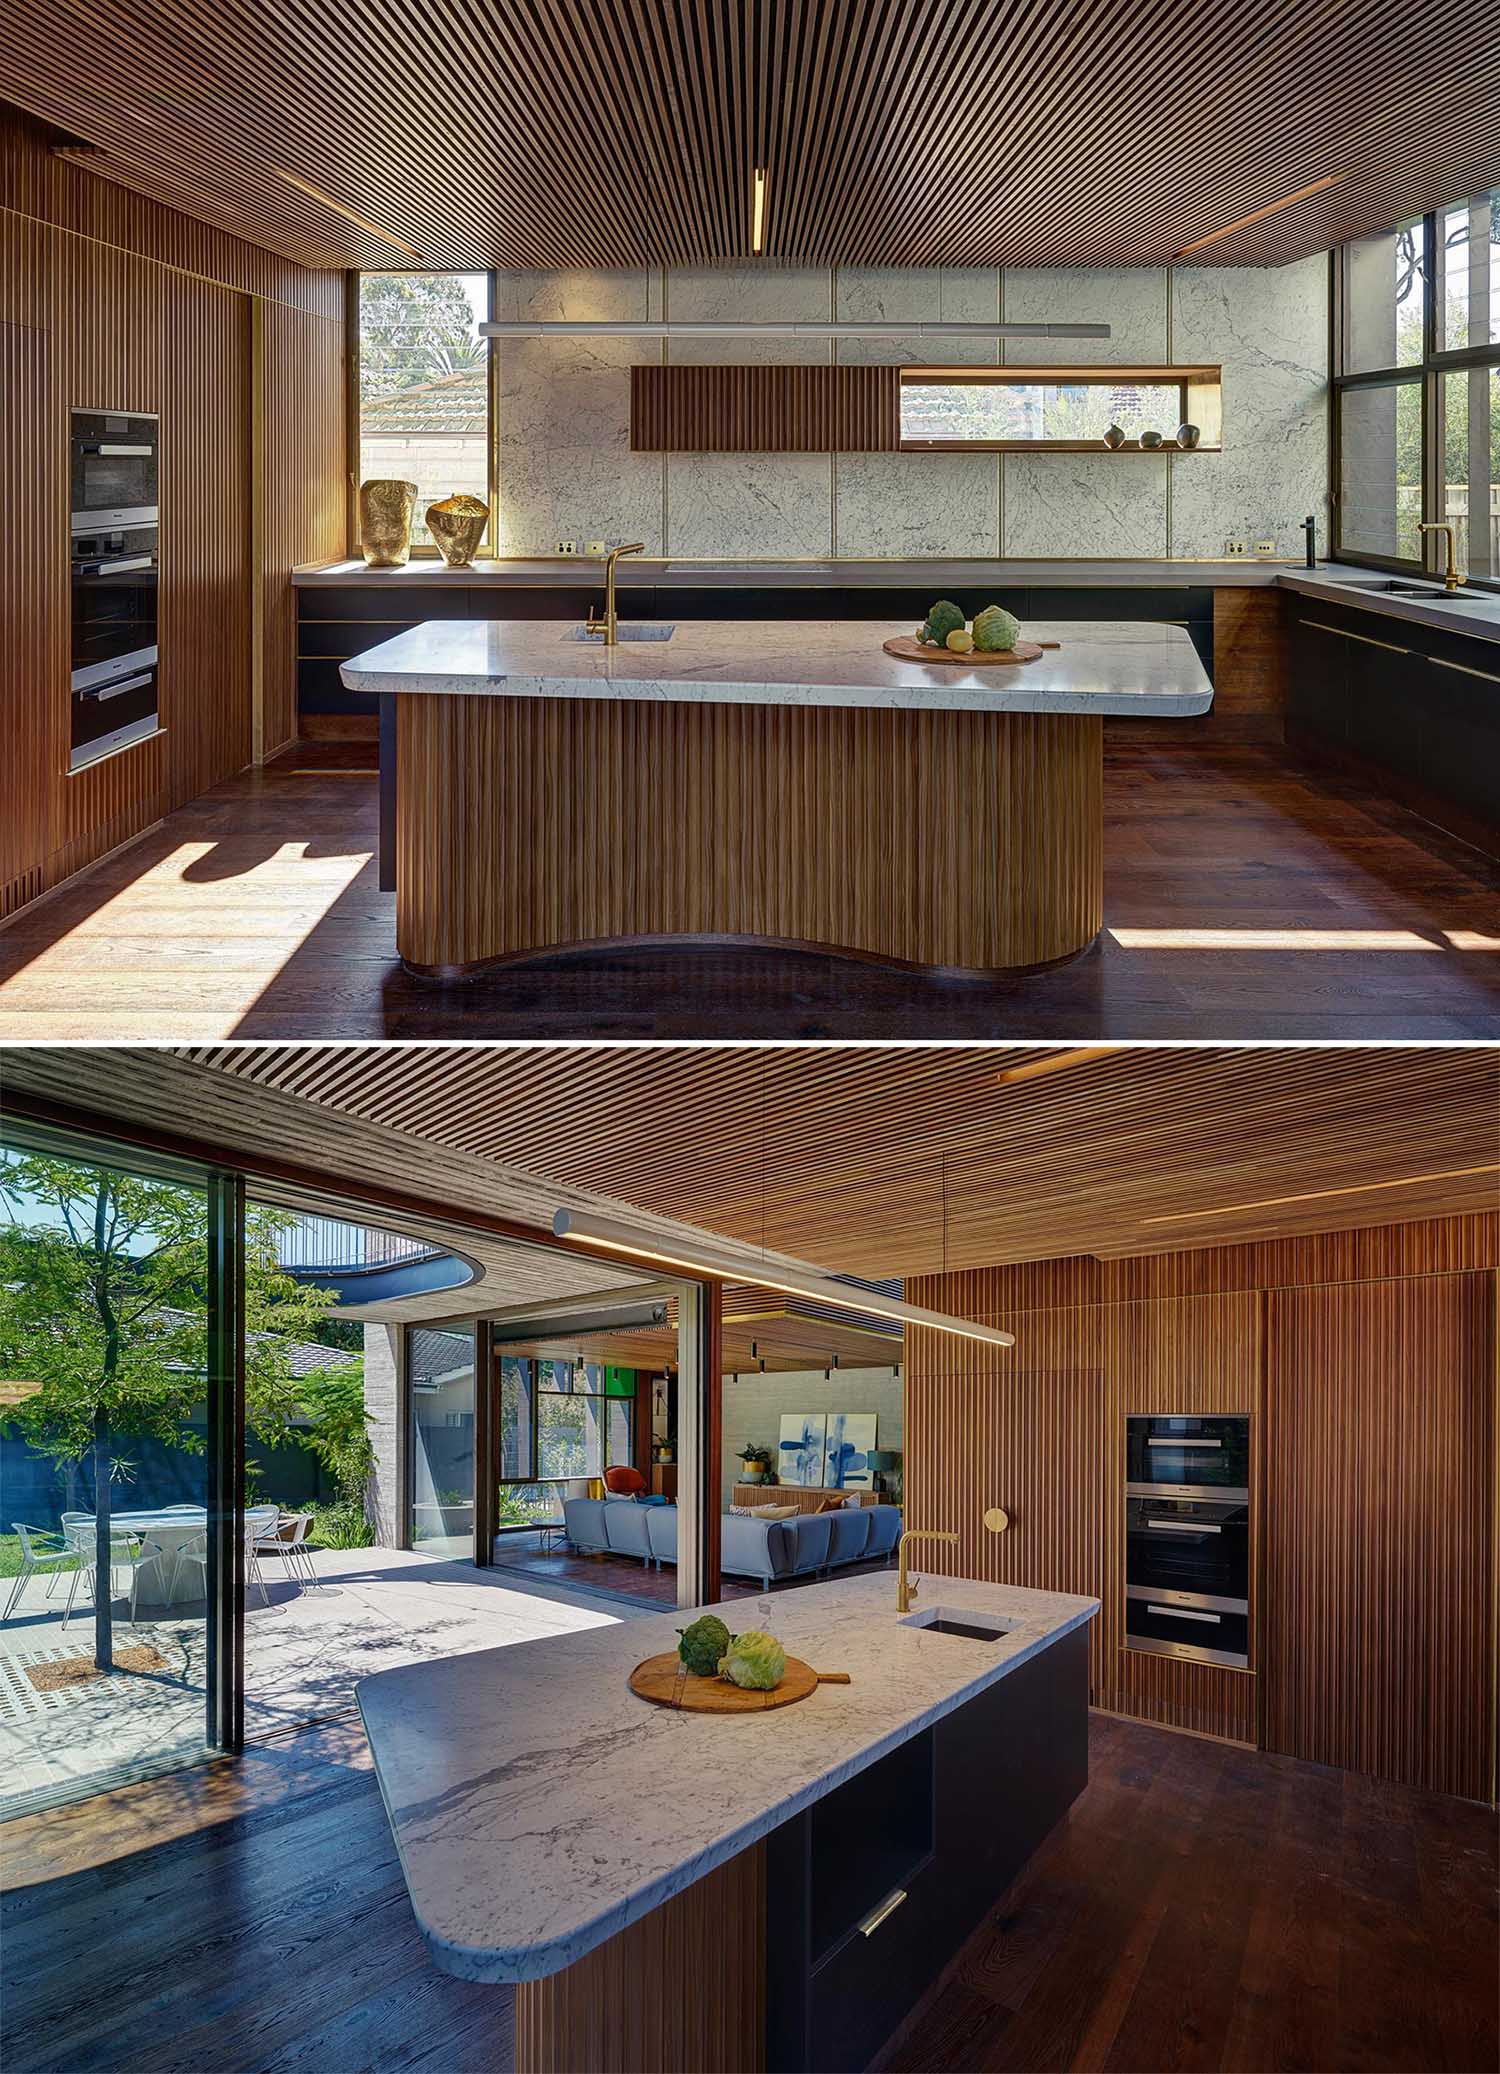 This modern kitchen has an island with a solid marble slab countertop and organically shaped timber cabinetwork. Timber ceilings conceal acoustic insulation.